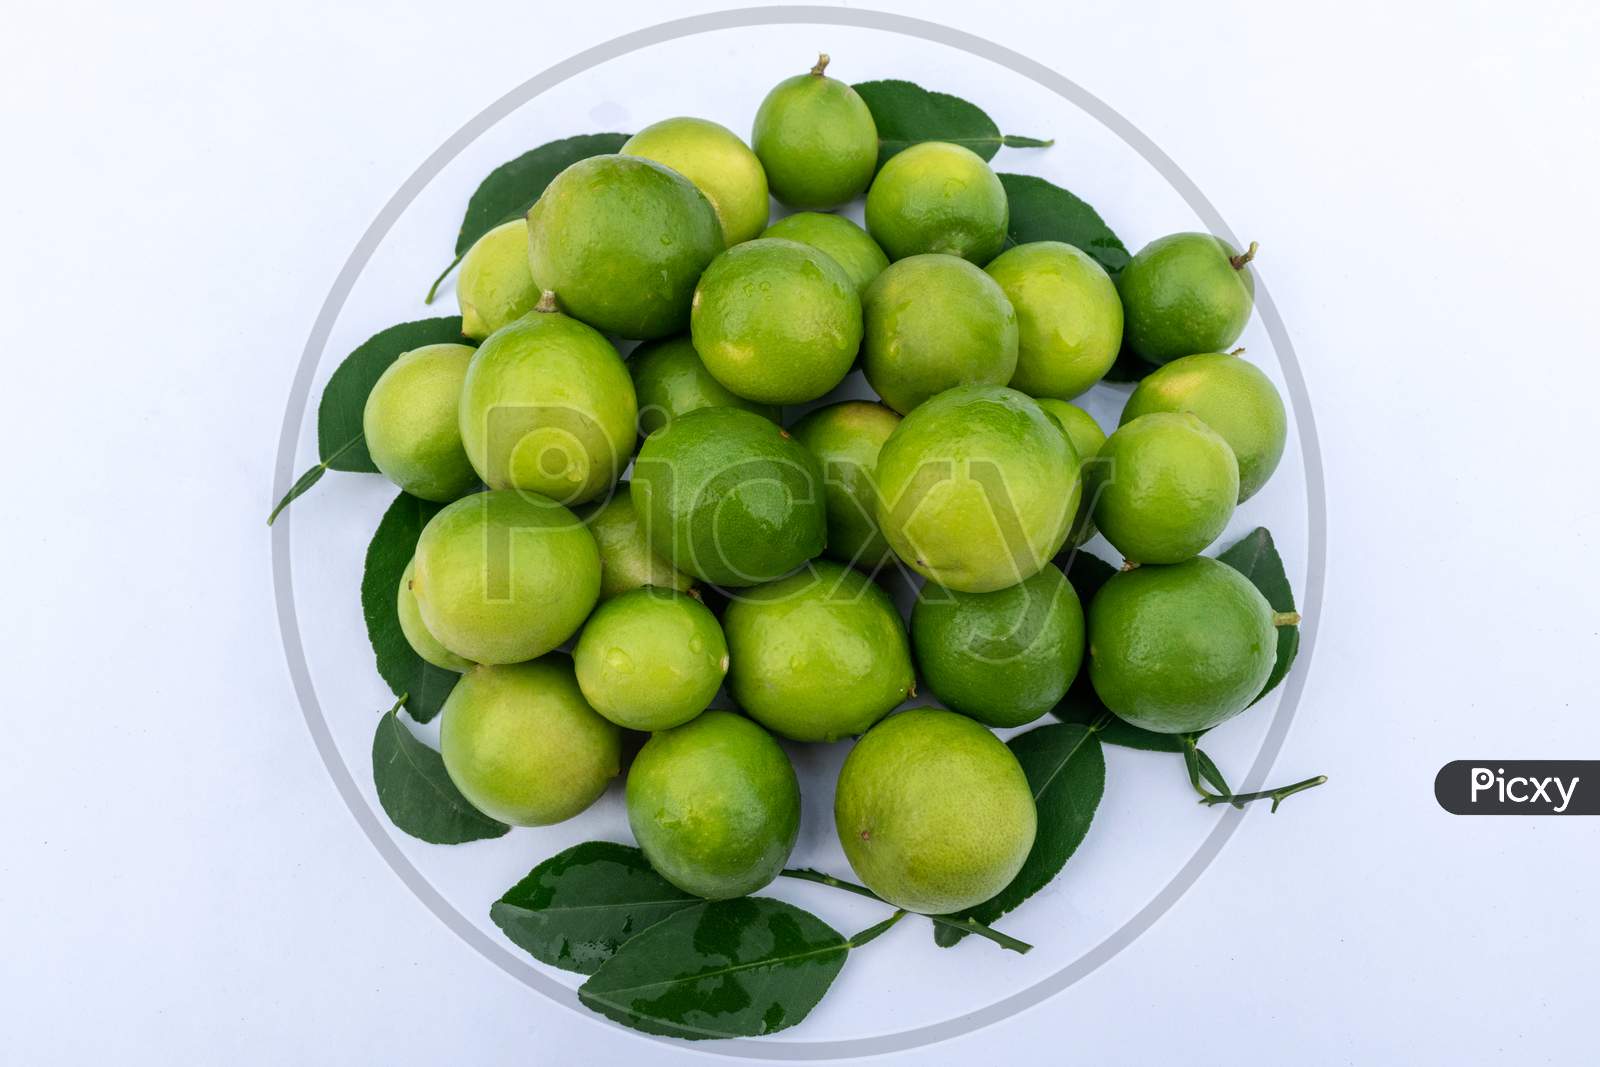 lemons with green leaves on white background